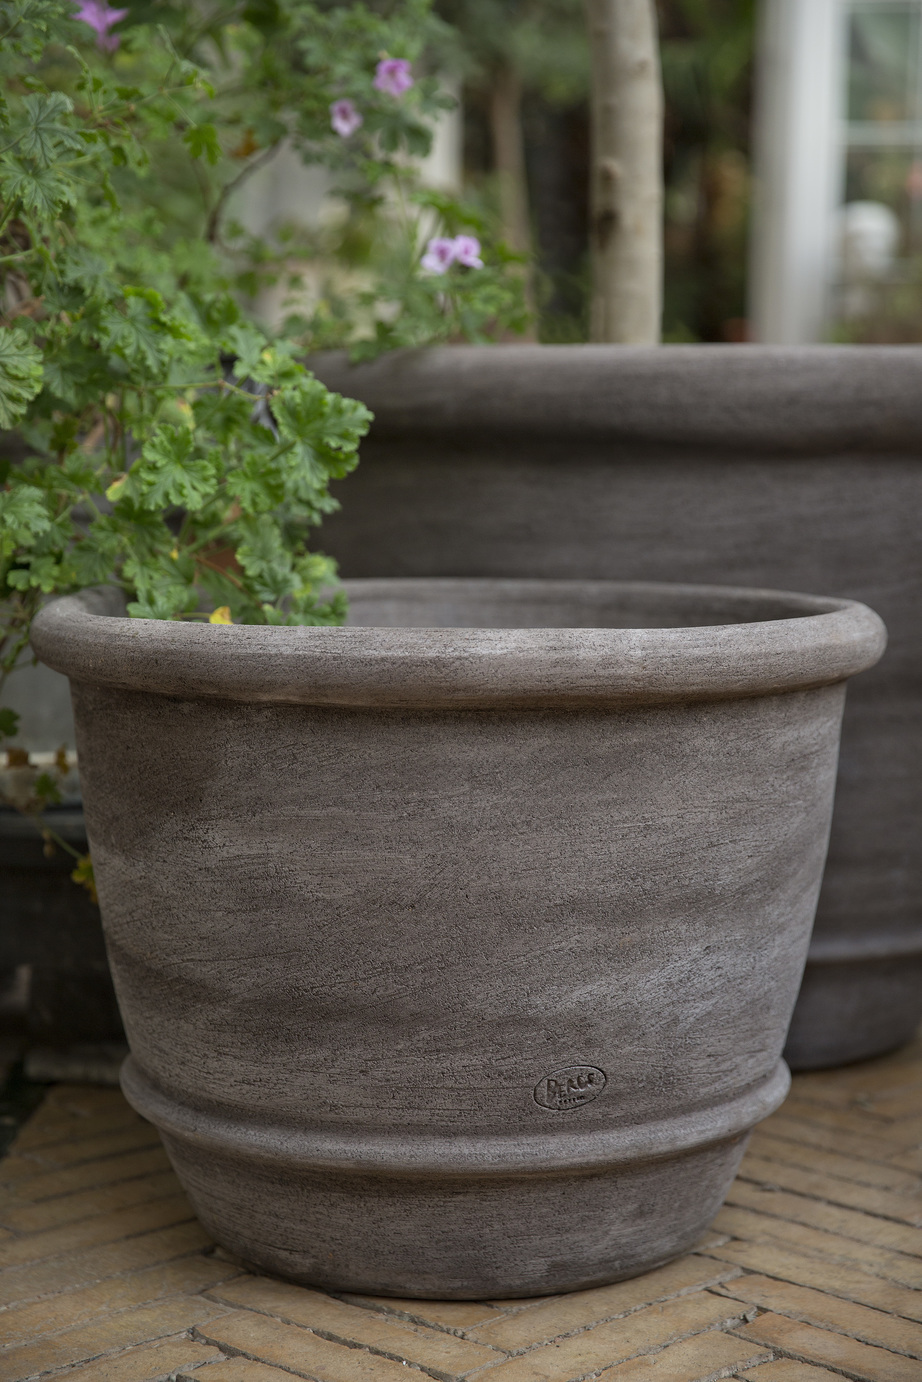 Large grey bell shaped outdoor pot